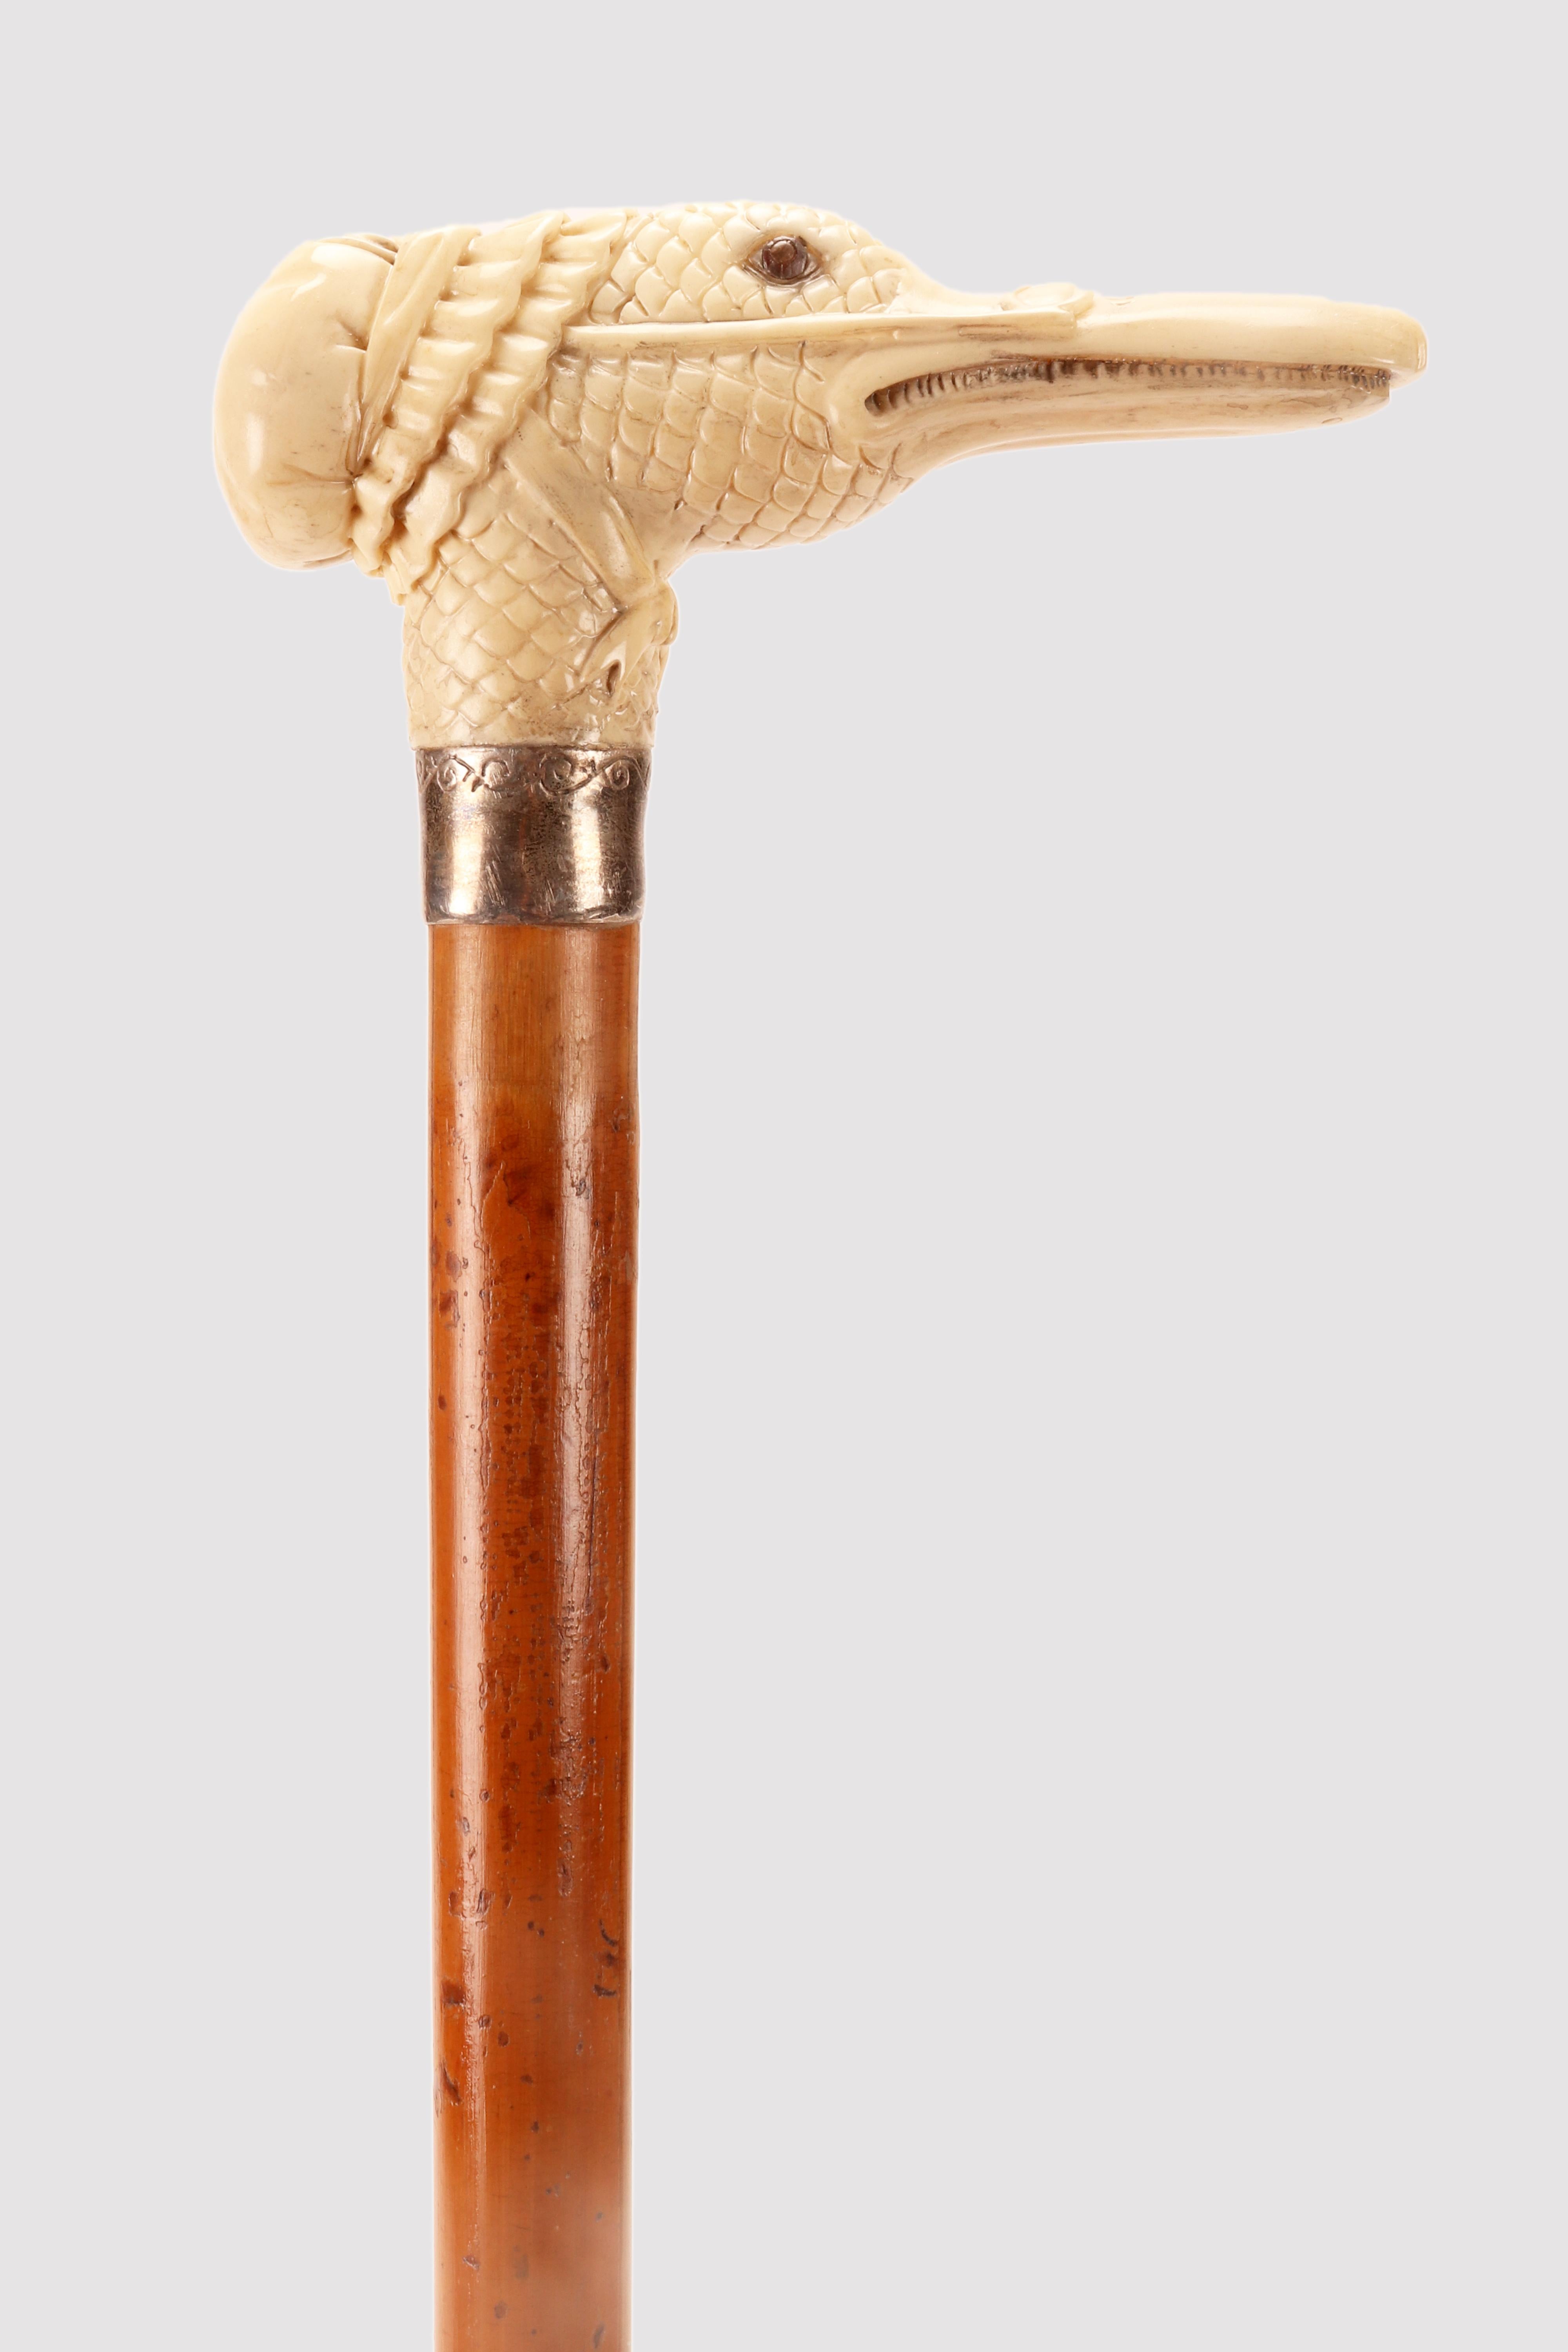 Walking stick: Ivory carved handle T shape, depicting a goose head, wearing glasses and a nightcap. Silver ring. Sulphur glass eyes. Malacca wood shaft. Metal ferule. Austria circa 1880.                                                               